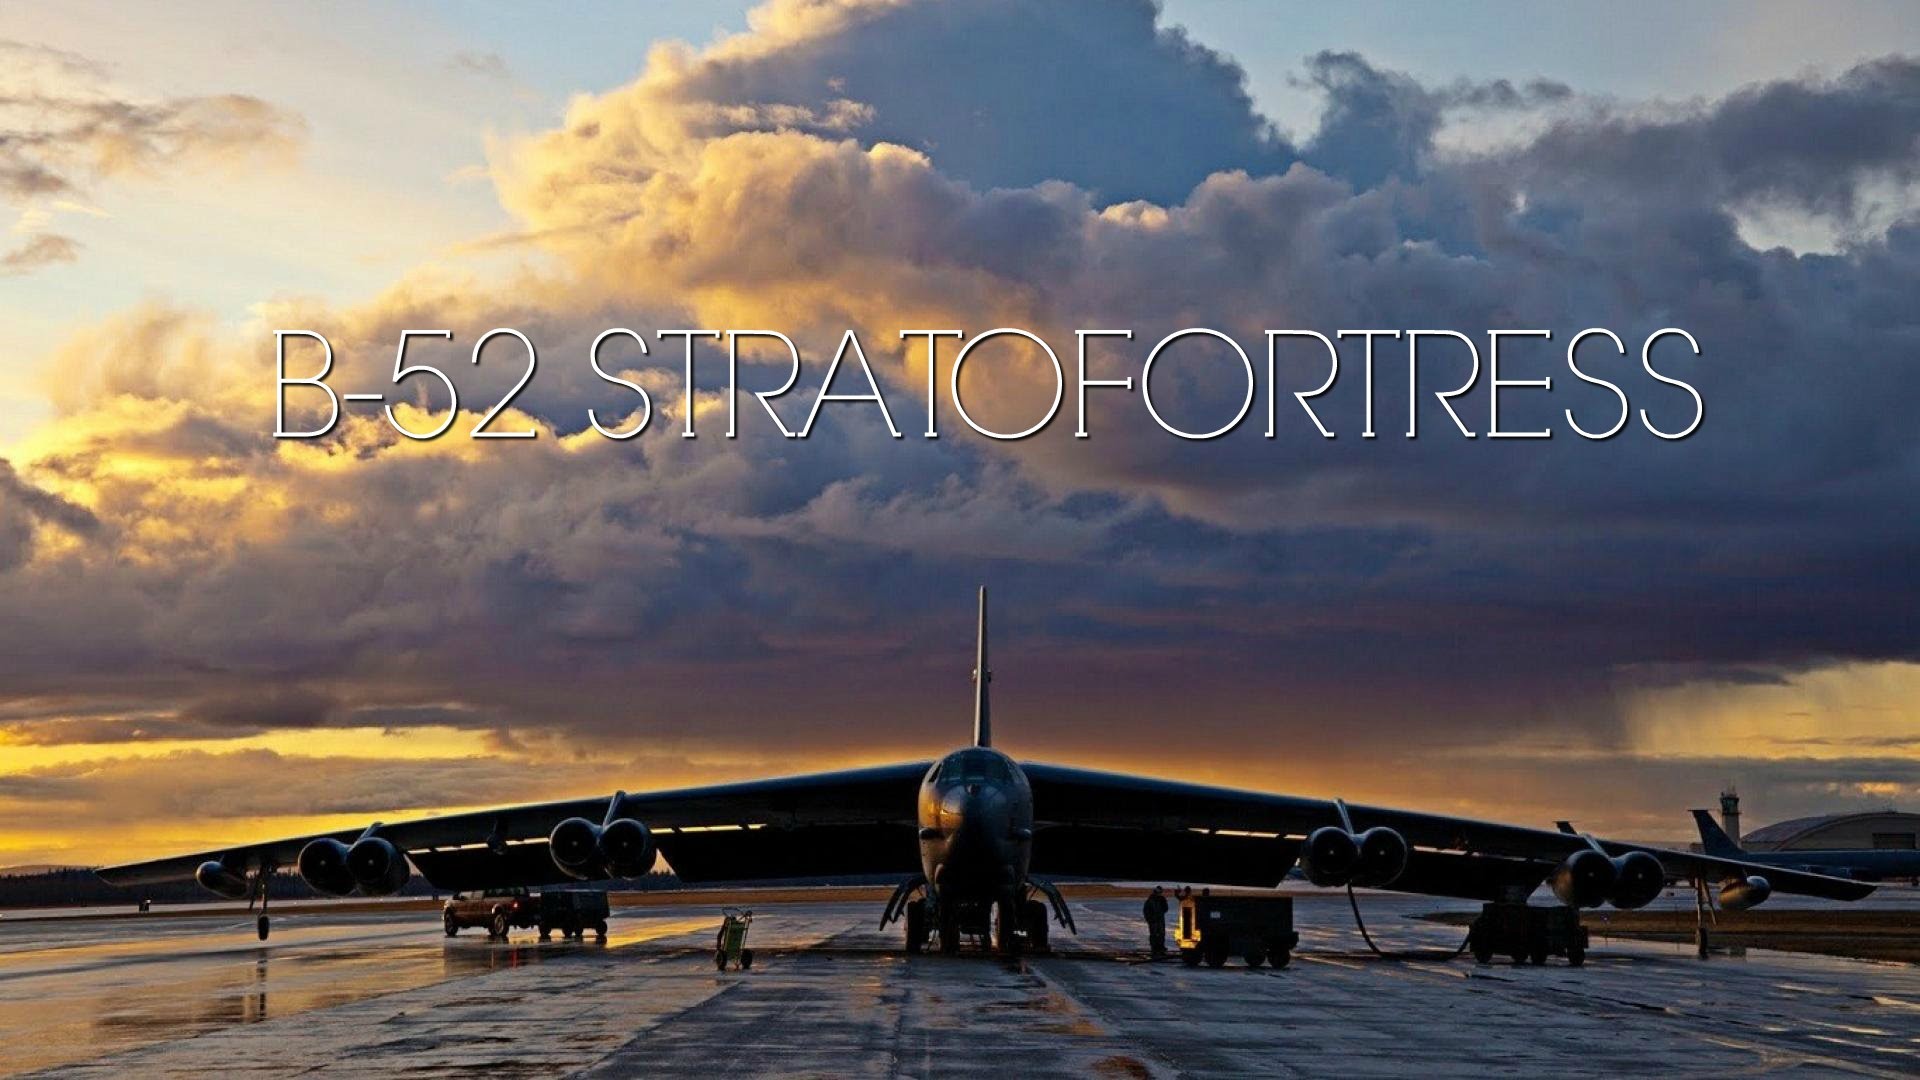 1920x1080 B-52 Stratofortress - "The Flying Fortress" strategic bomber of US Army -  YouTube